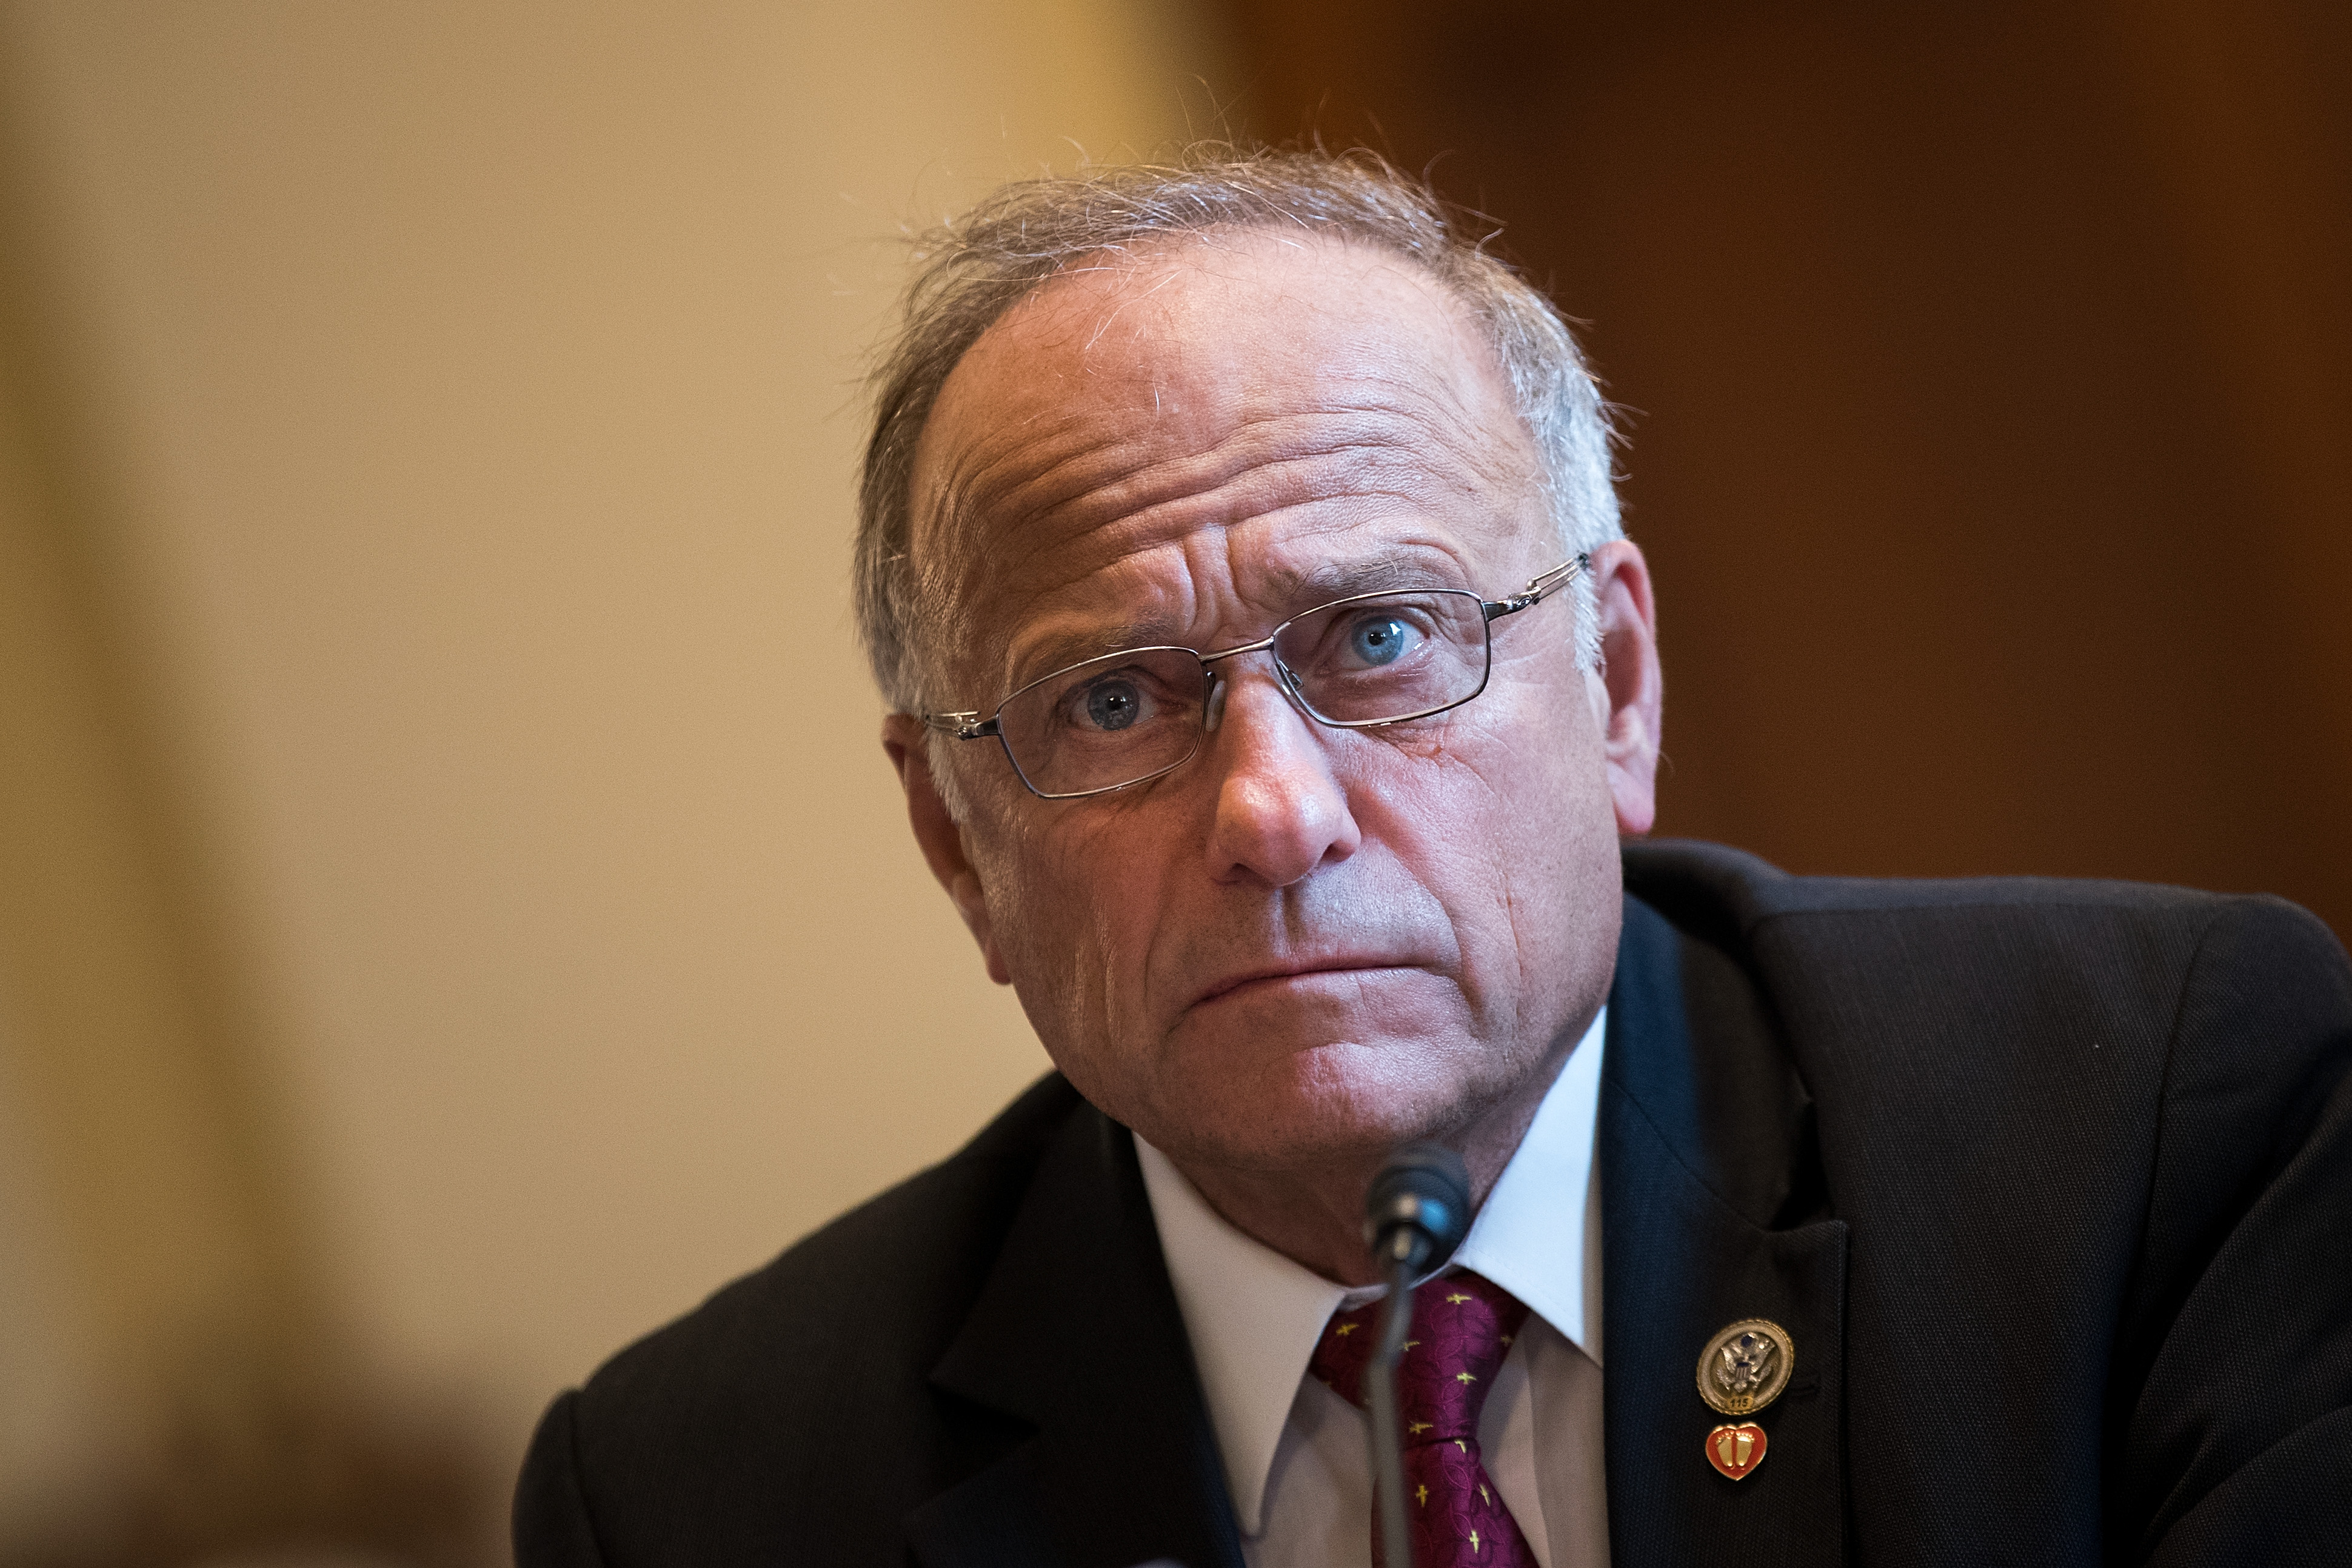 Rep. Steve King (R-IA) testifies during a House Veterans' Affairs Committee hearing, September 26, 2017 in Washington, DC. Drew Angerer/Getty Images